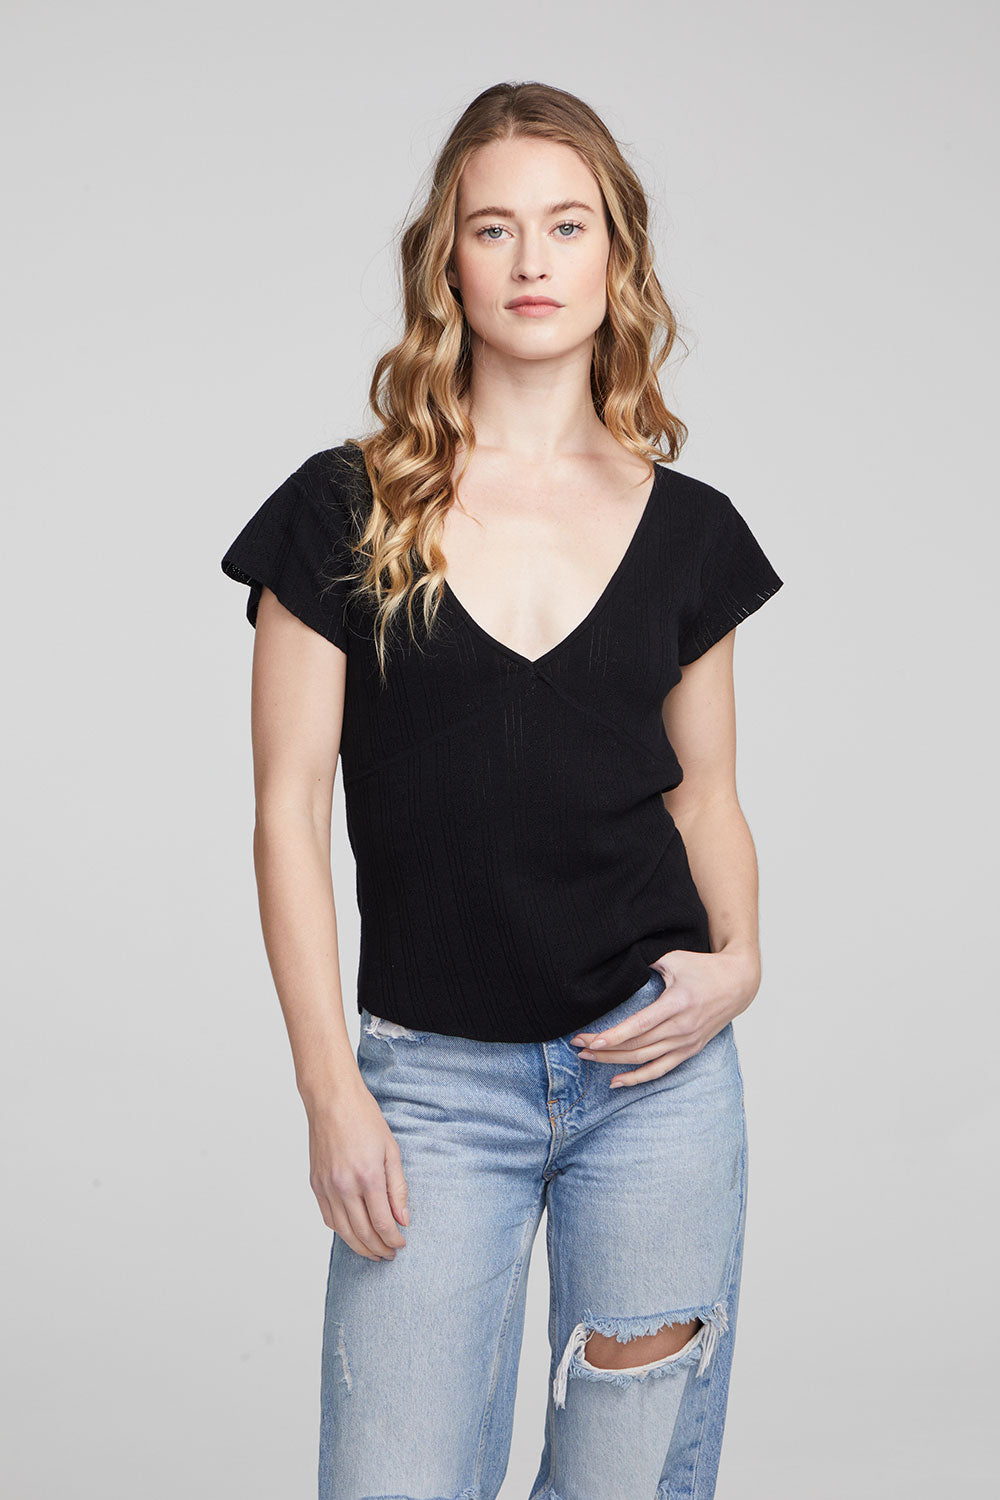 Page Shadow Star Black Tee WOMENS chaserbrand